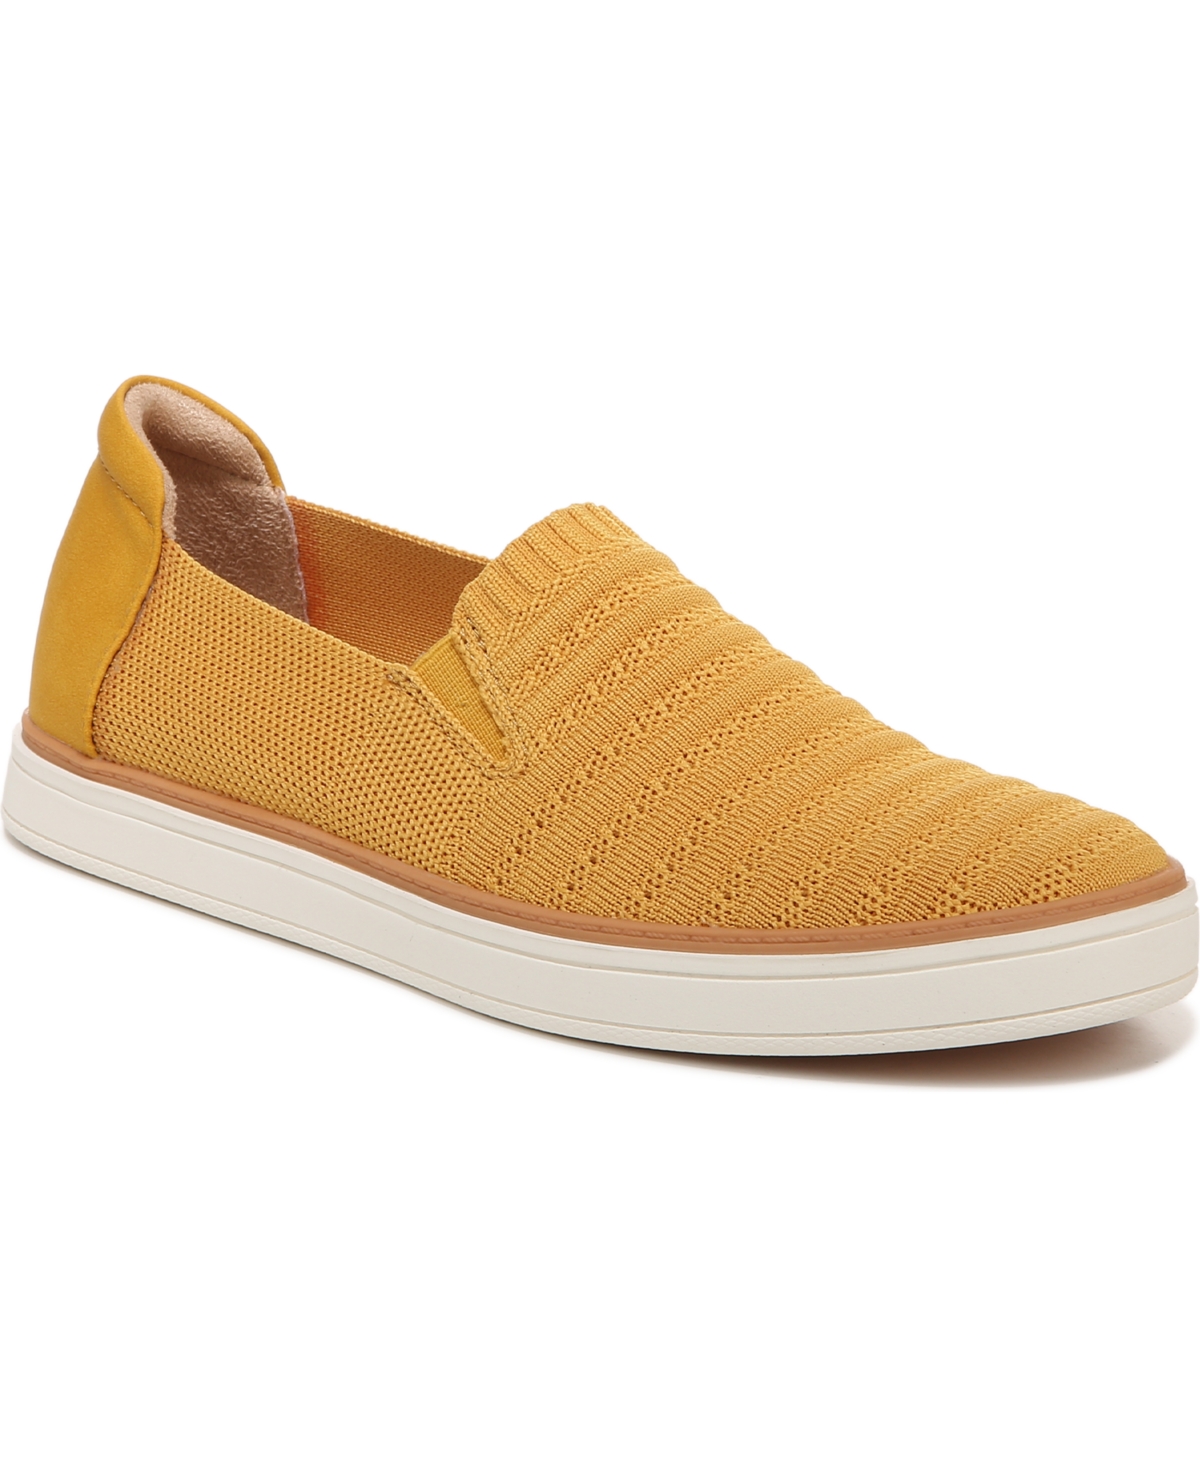 Soul Naturalizer Kemper Slip-ons Women's Shoes In Yellow Knit